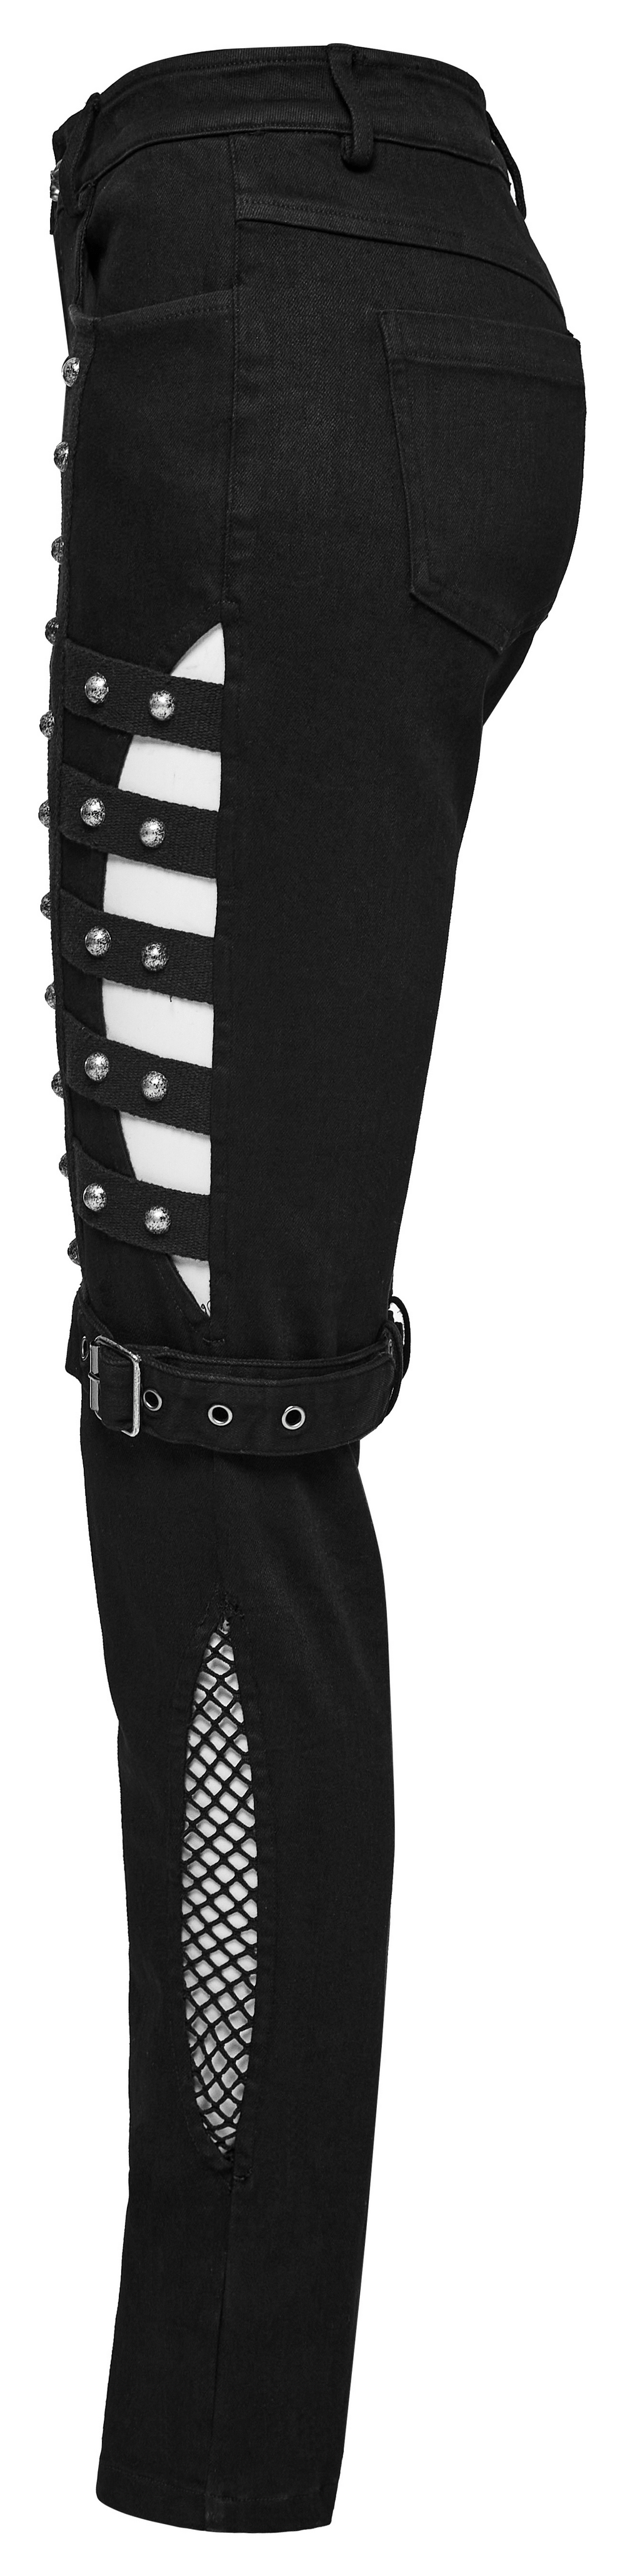 Edgy Punk Riveted Slim Jeans with Mesh Panels and Buckles